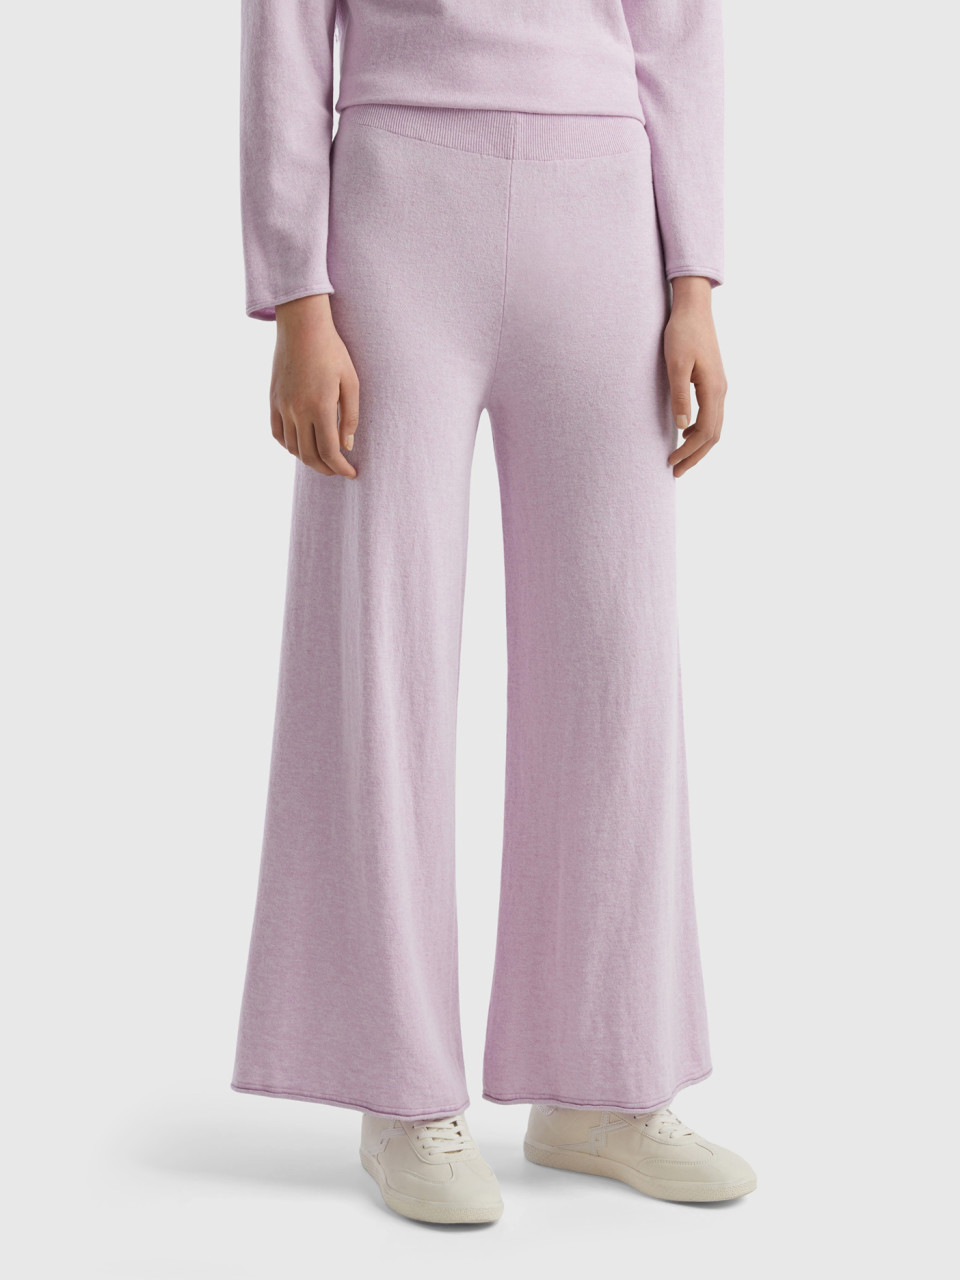 Benetton, Light Lilac Wide Trousers In Cashmere And Wool Blend, Lilac, Women